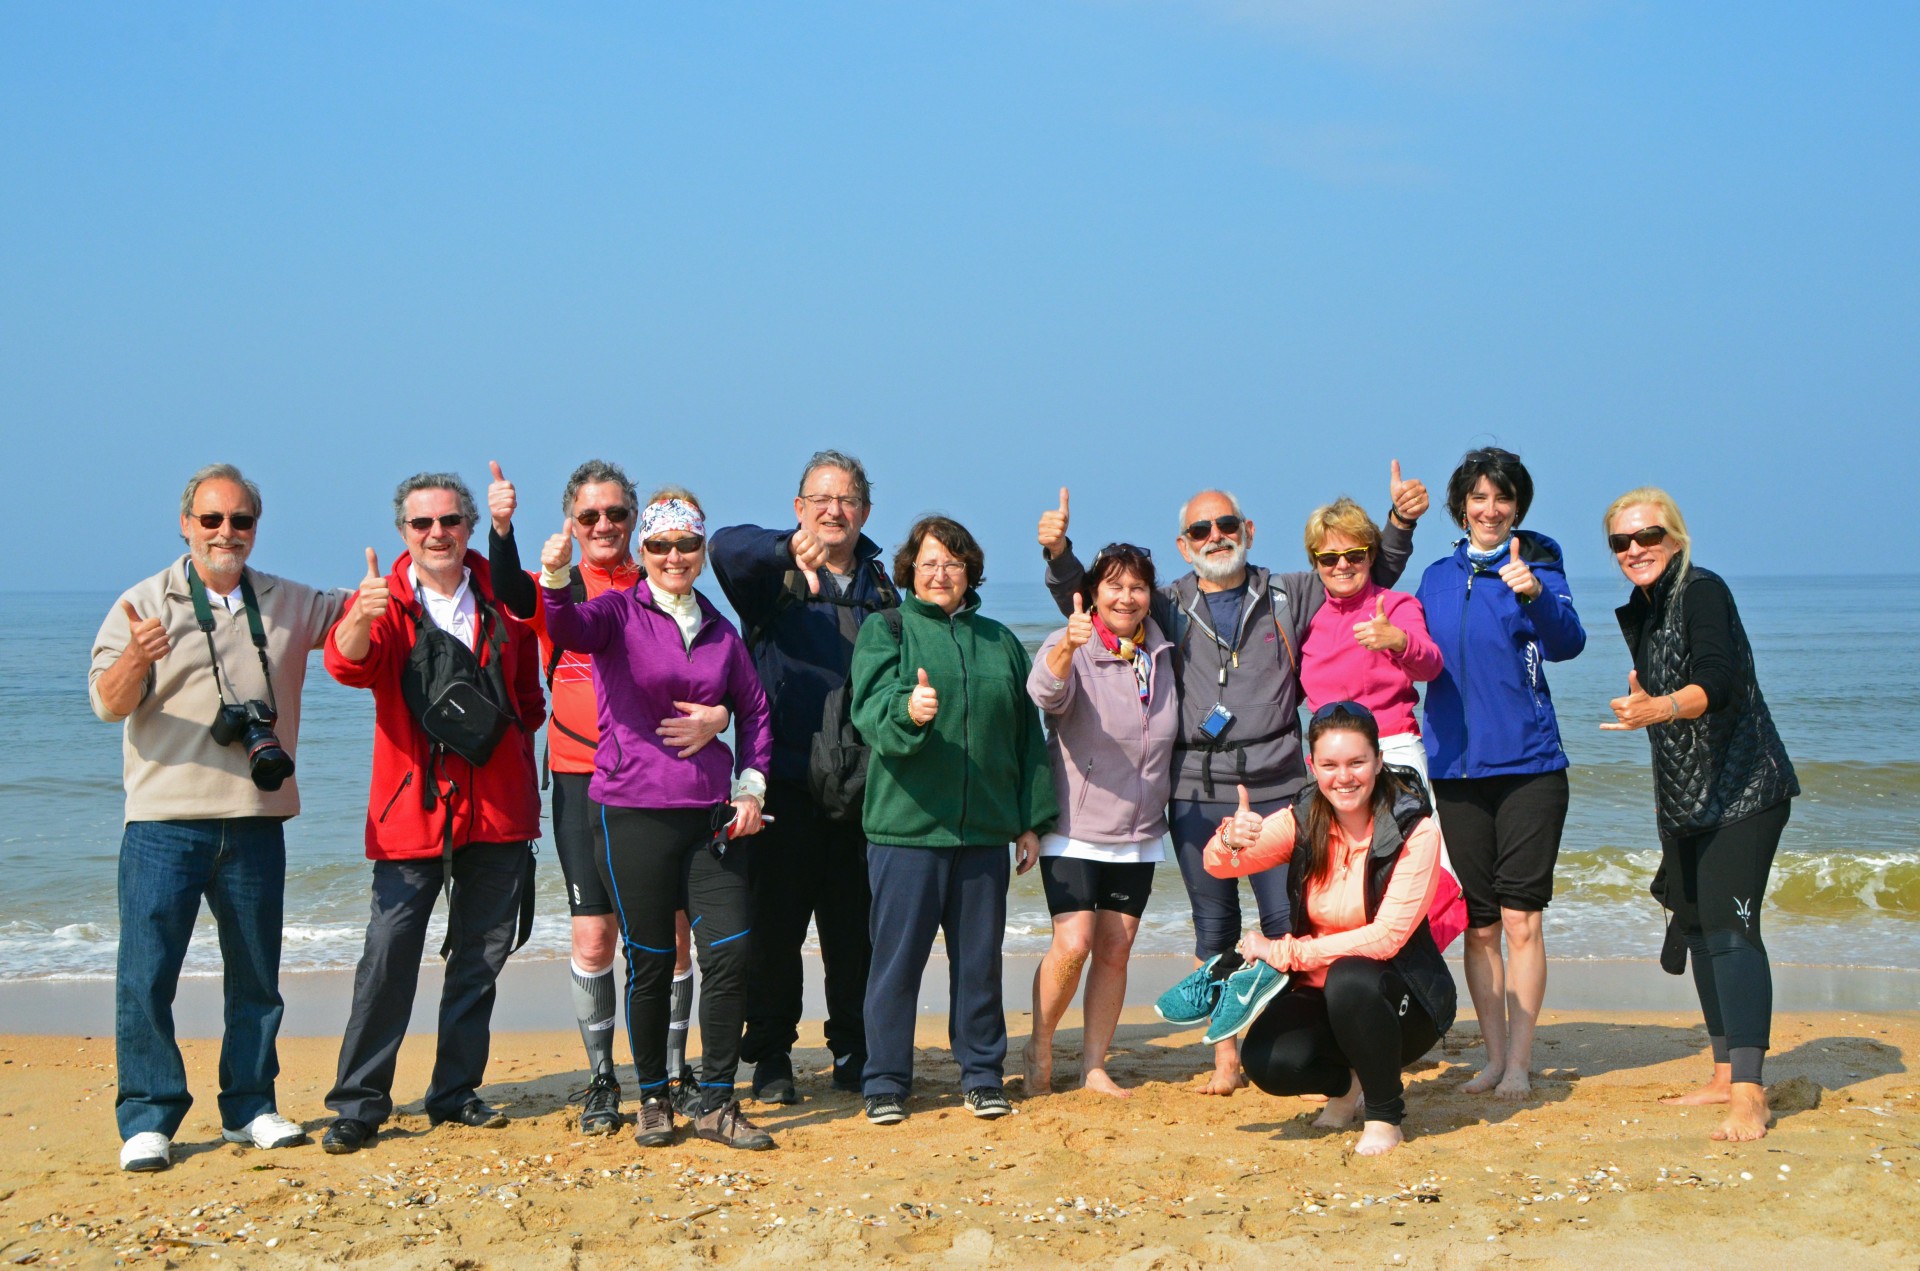 Our Group at the North Sea